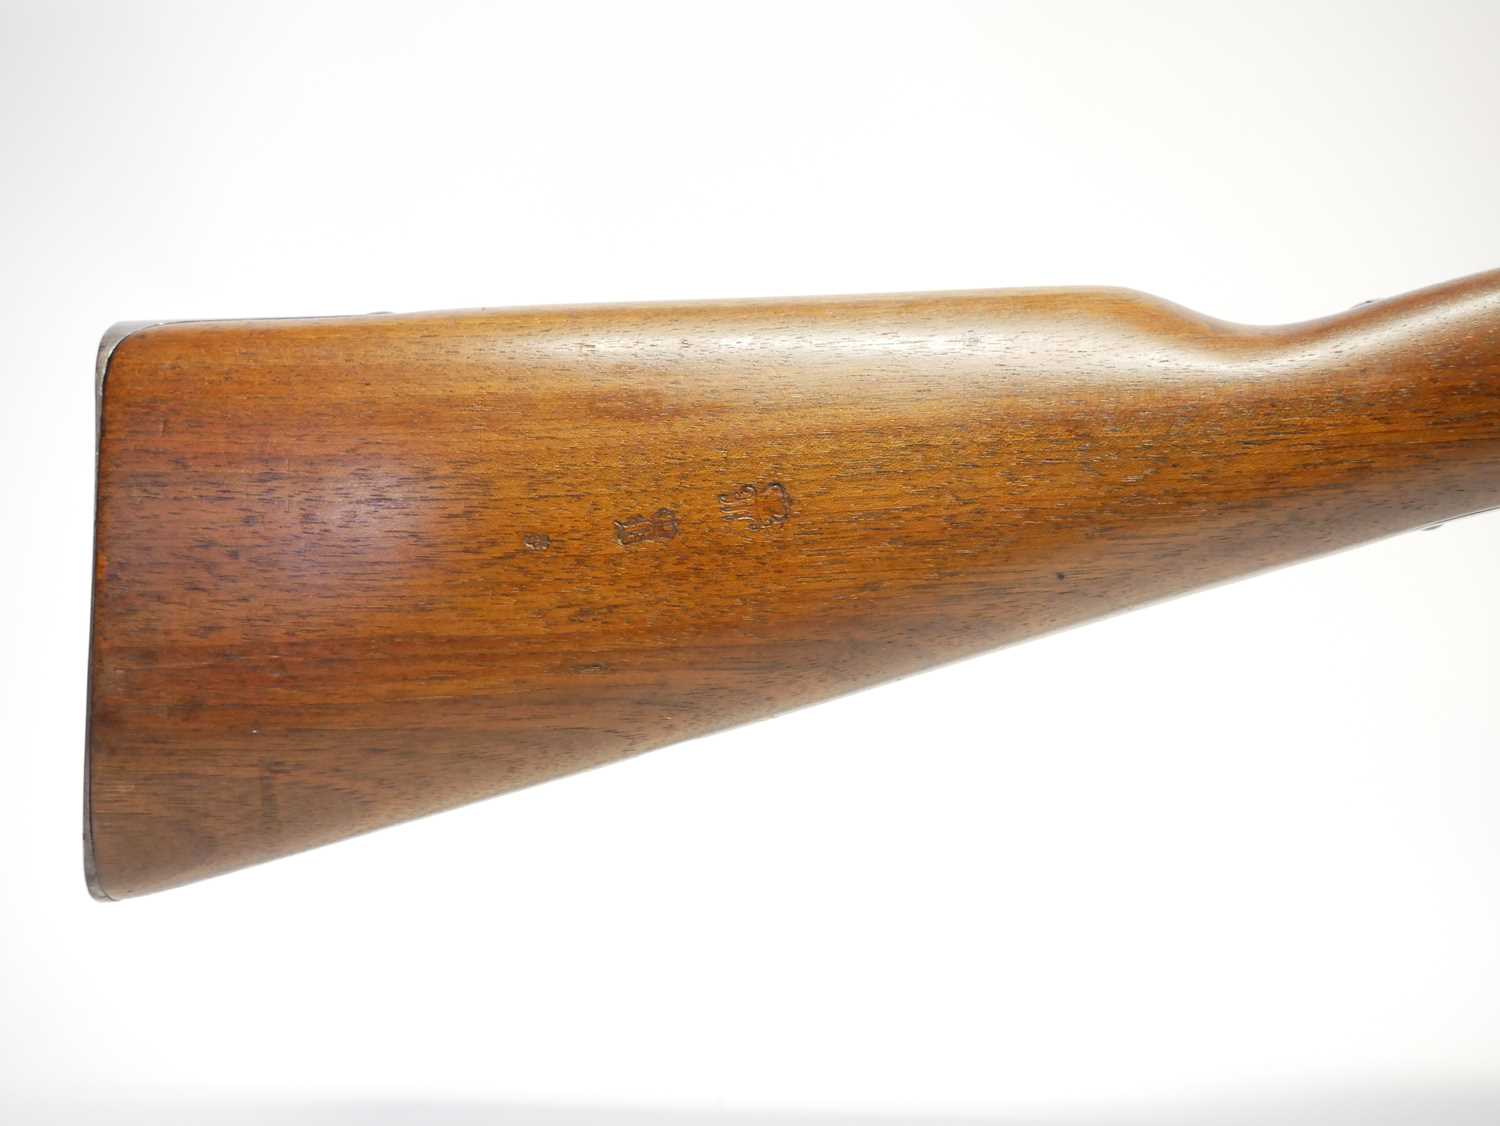 Mauser M1871/84 bolt action rifle 11 x 60R / .43 calibre, matching serial numbers 6701, 30.5" barrel - Image 3 of 20